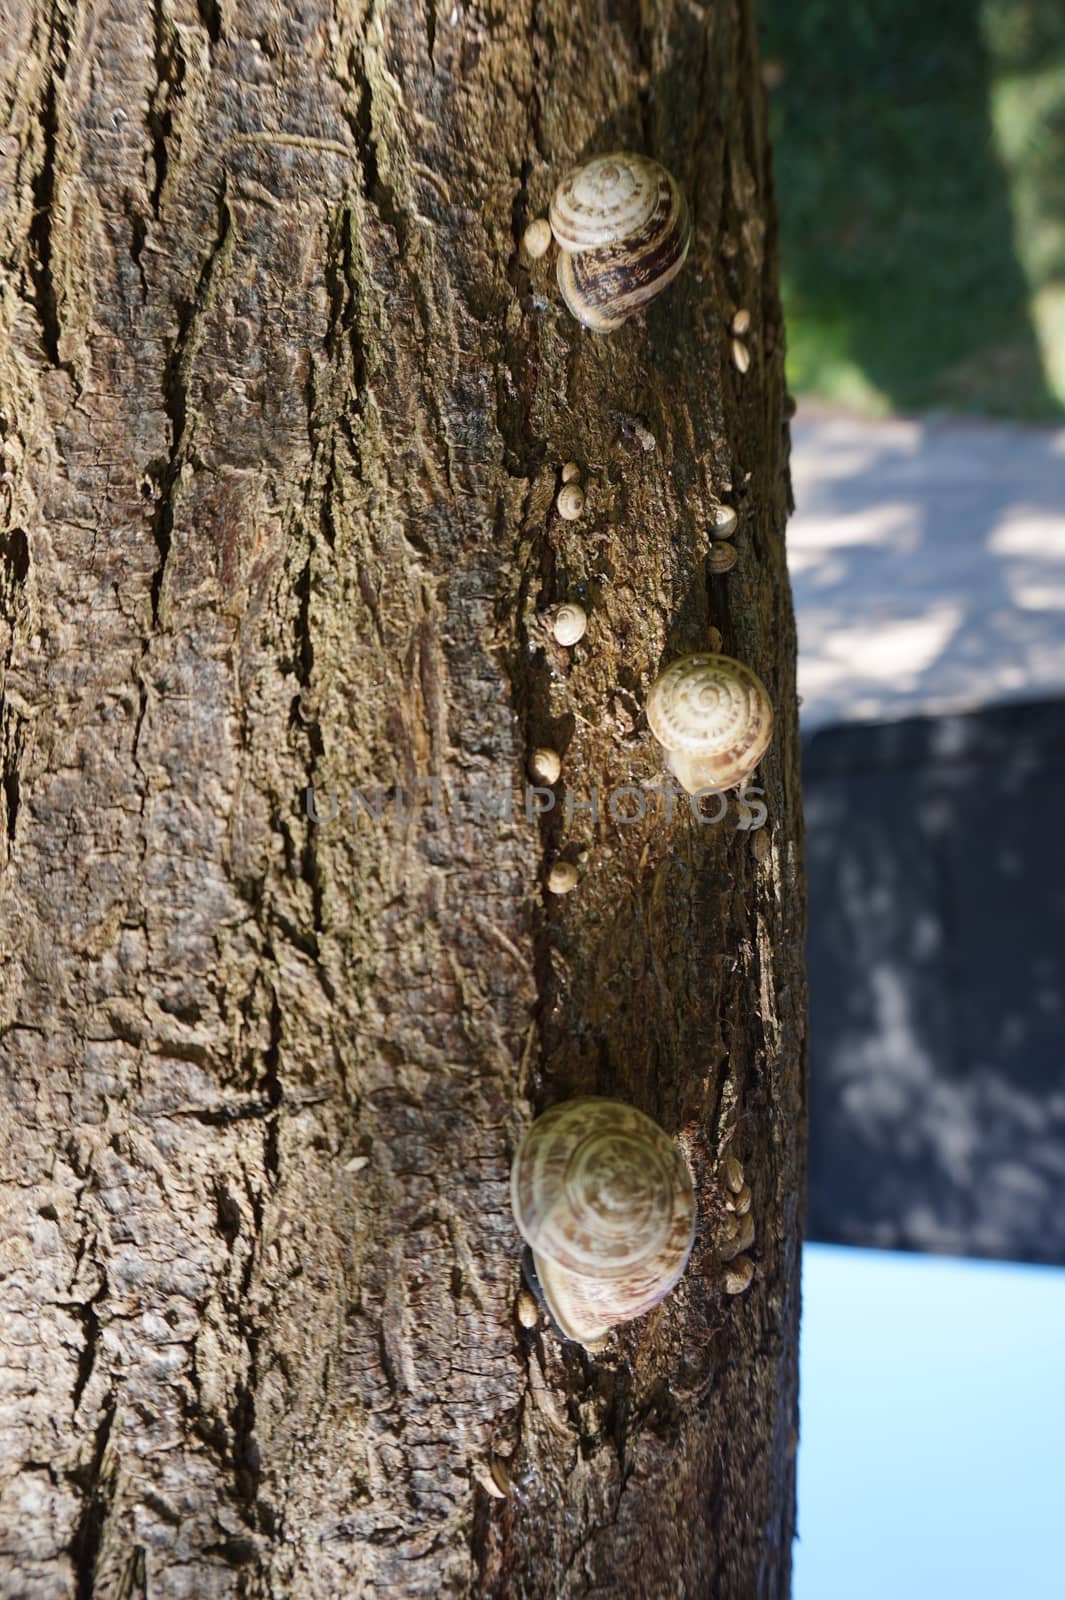 snail sitting on a tree on a Sunny summer day.